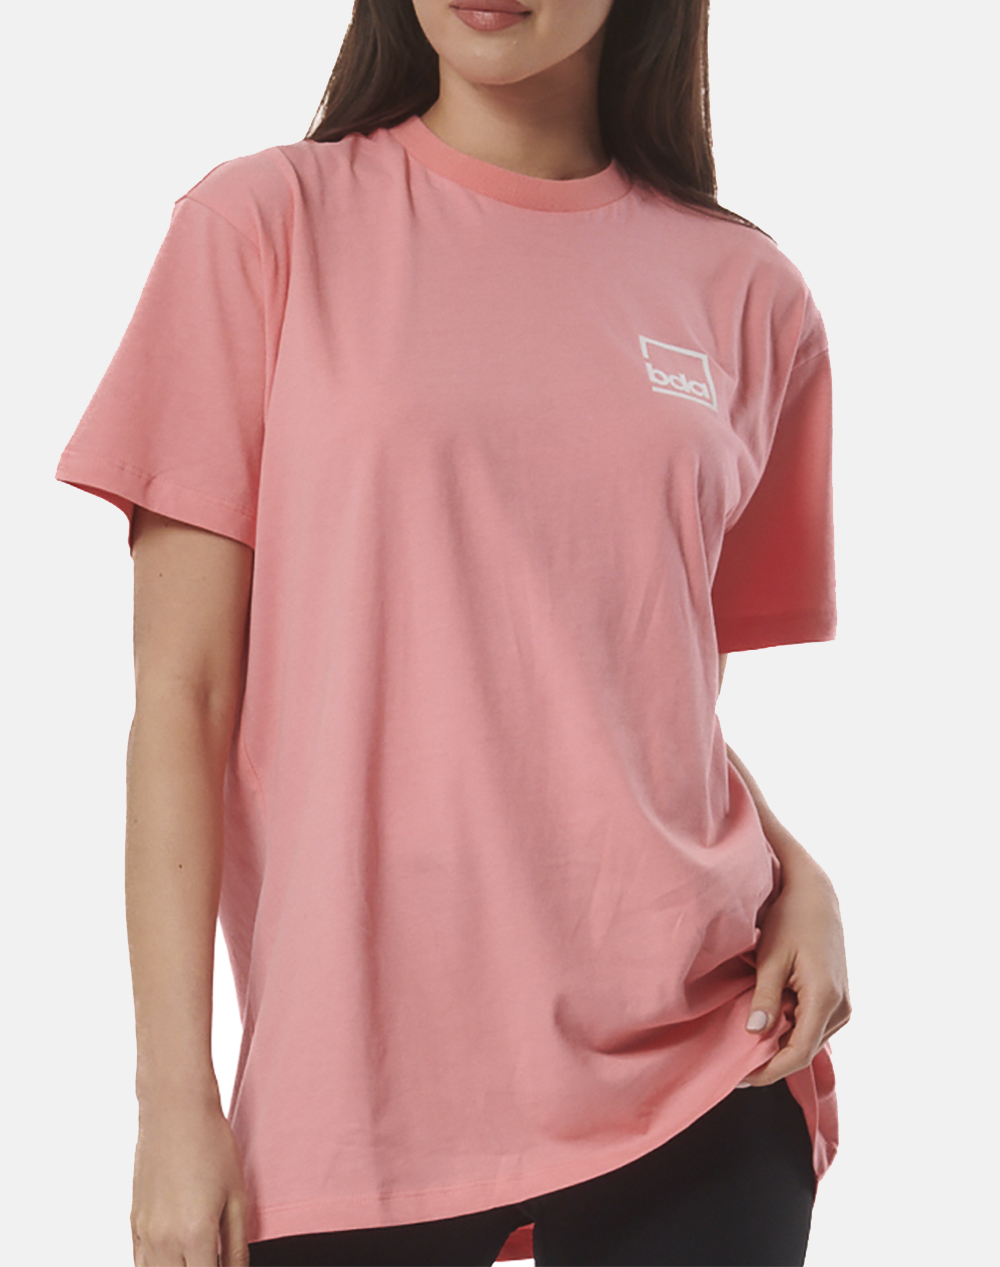 BODY ACTION WOMEN”S OVERSIZED TEE W/PRINT 051425-01-Coral Pink Coral